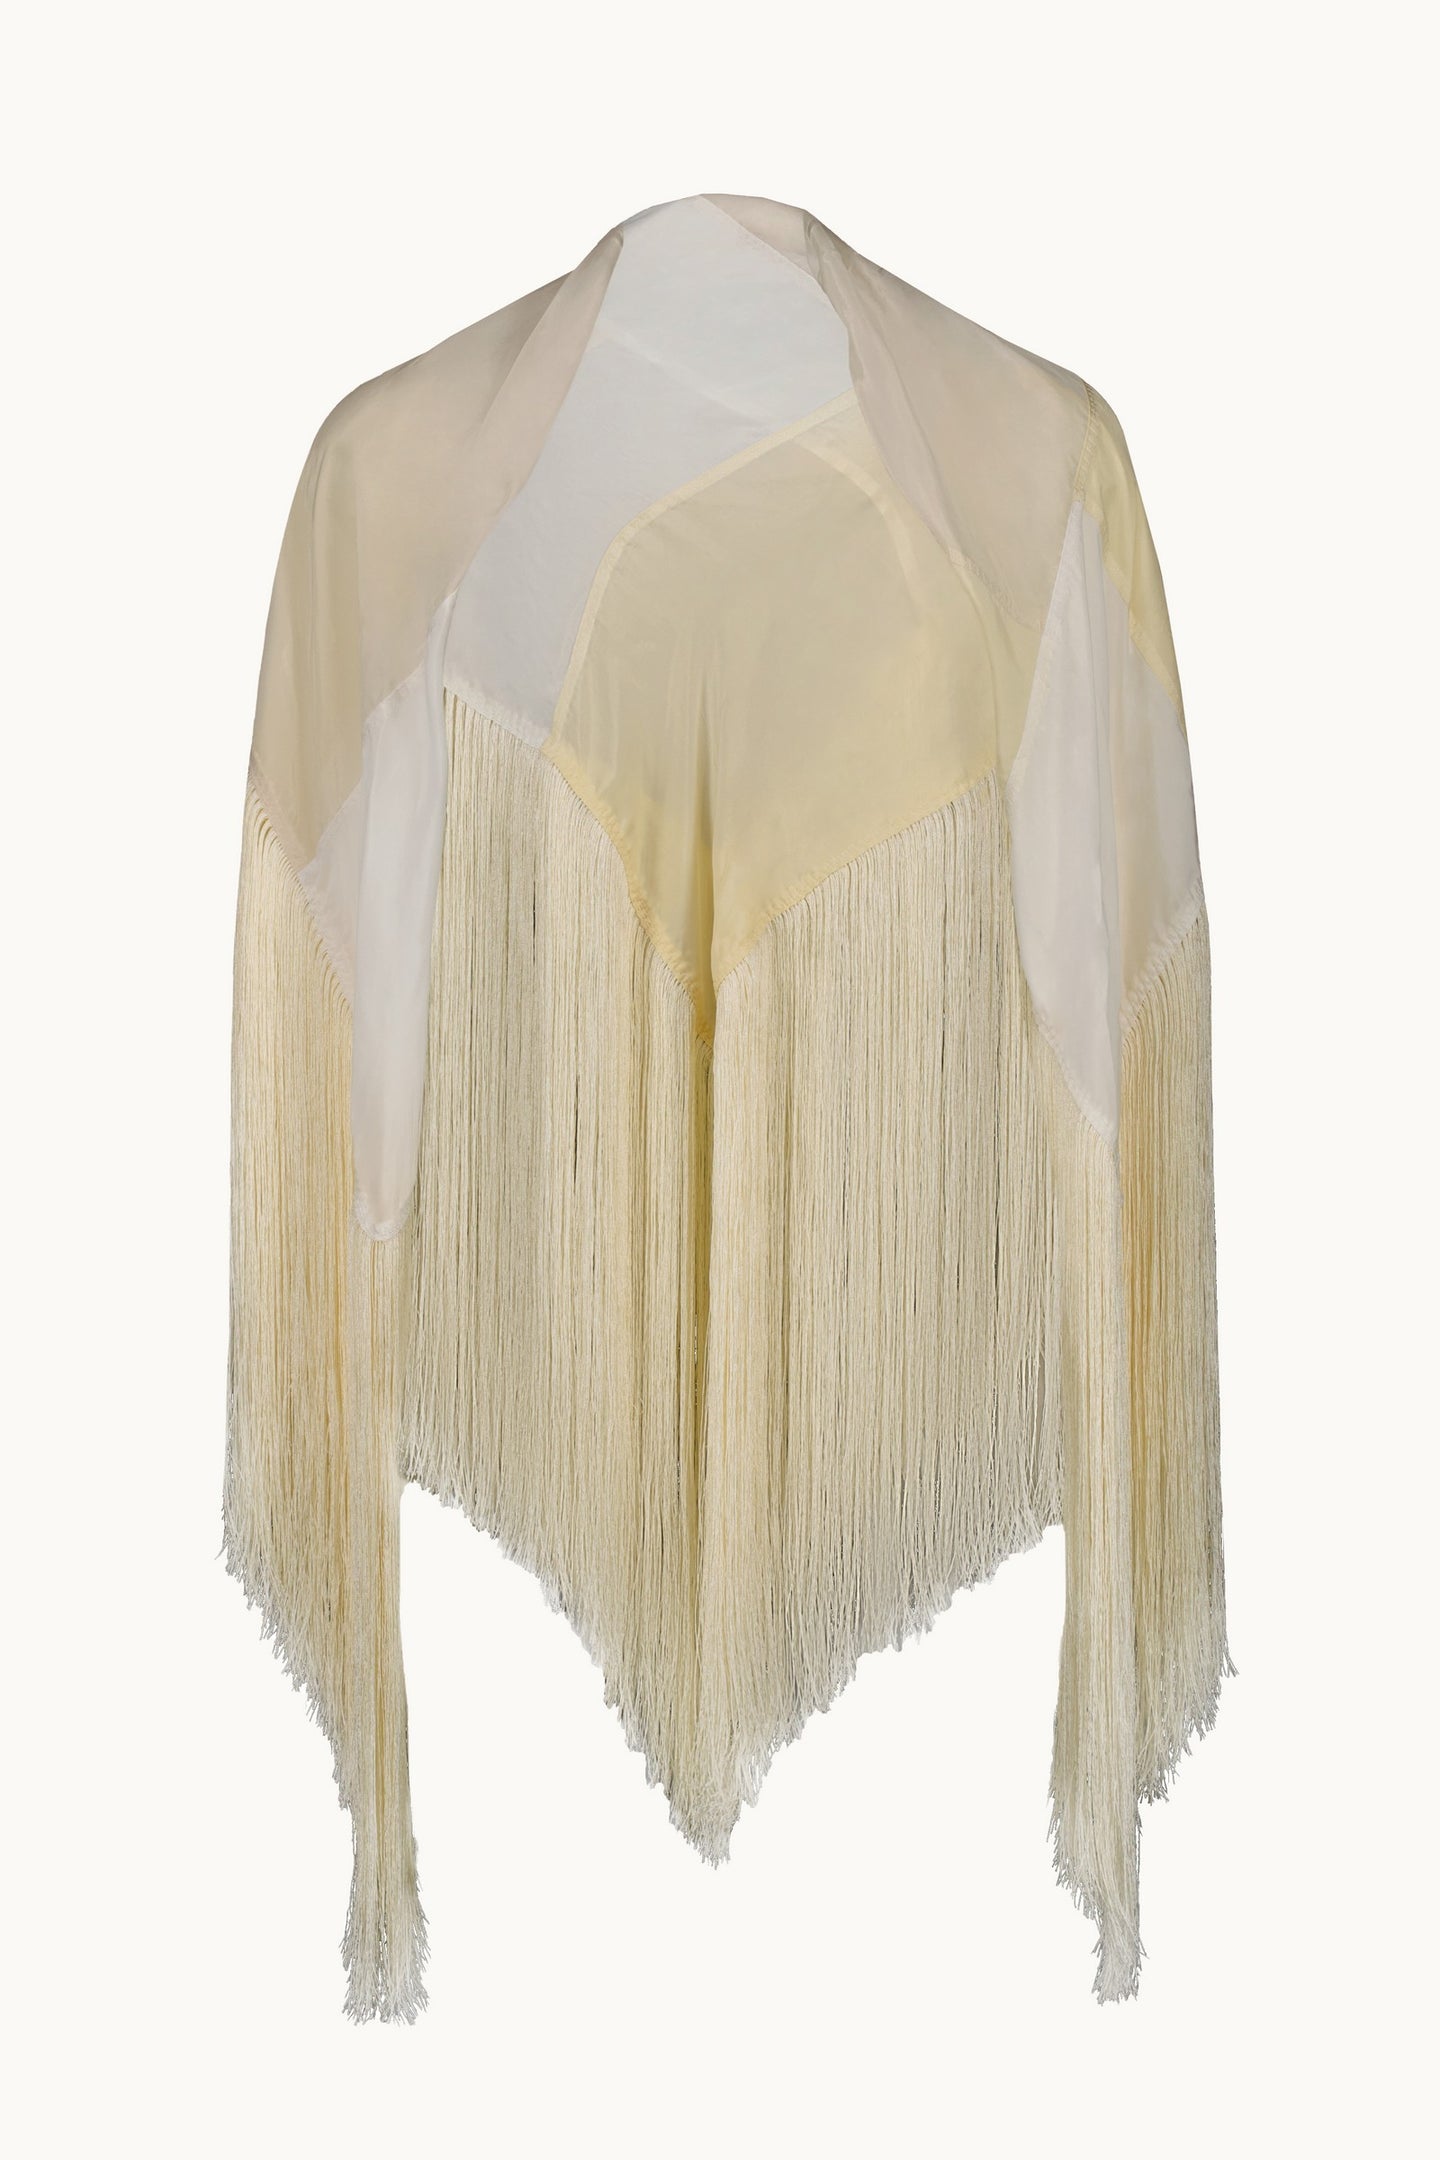 Glory ivory scarf front view